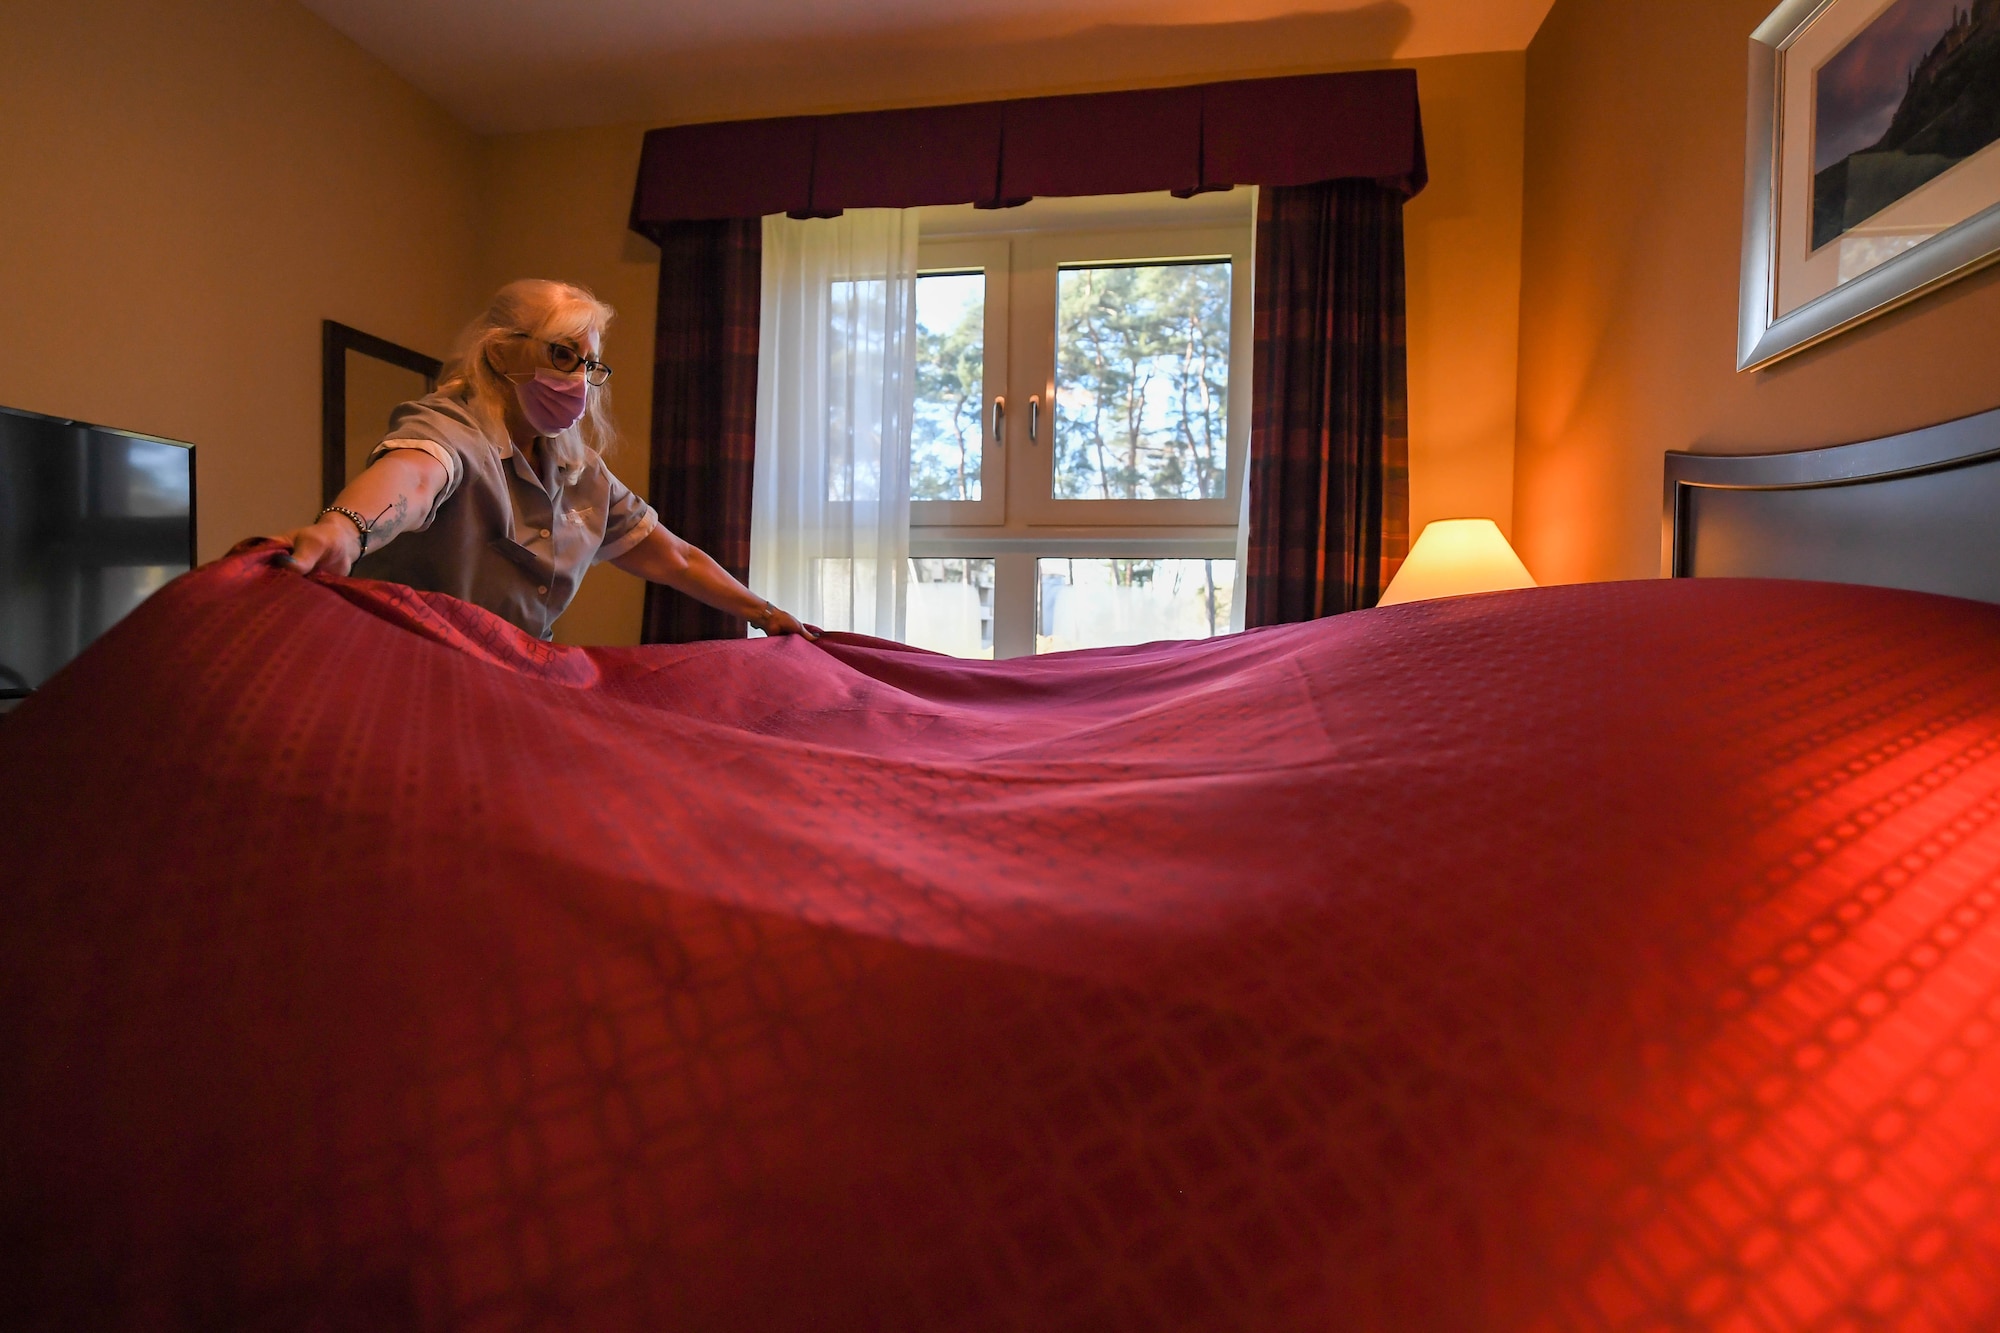 Christiane Schafer, 786th Force Support Squadron housekeeper, makes up a bed at a new temporary lodging facility at Ramstein Air Base, Germany, Feb. 23, 2022. The TLF offers 70 two-bedroom family-units with a fully furnished kitchen, bathroom and underfloor-heating, as well as an elevator. (U.S. Air Force photo by Airman 1st Class Jared Lovett)